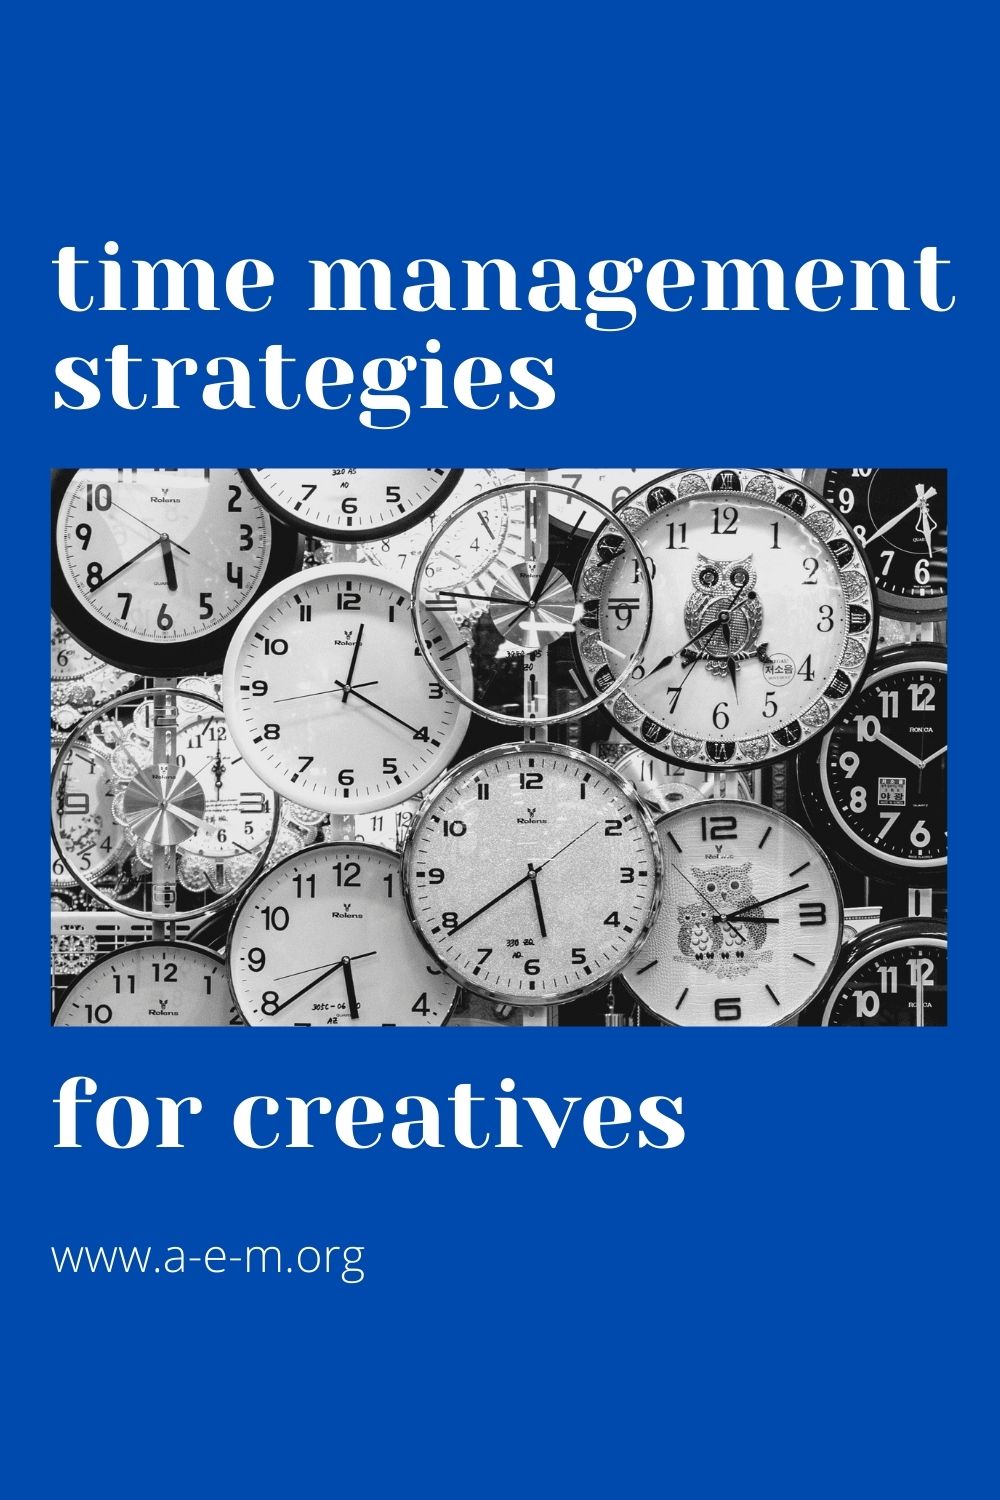 time management strategies for creatives